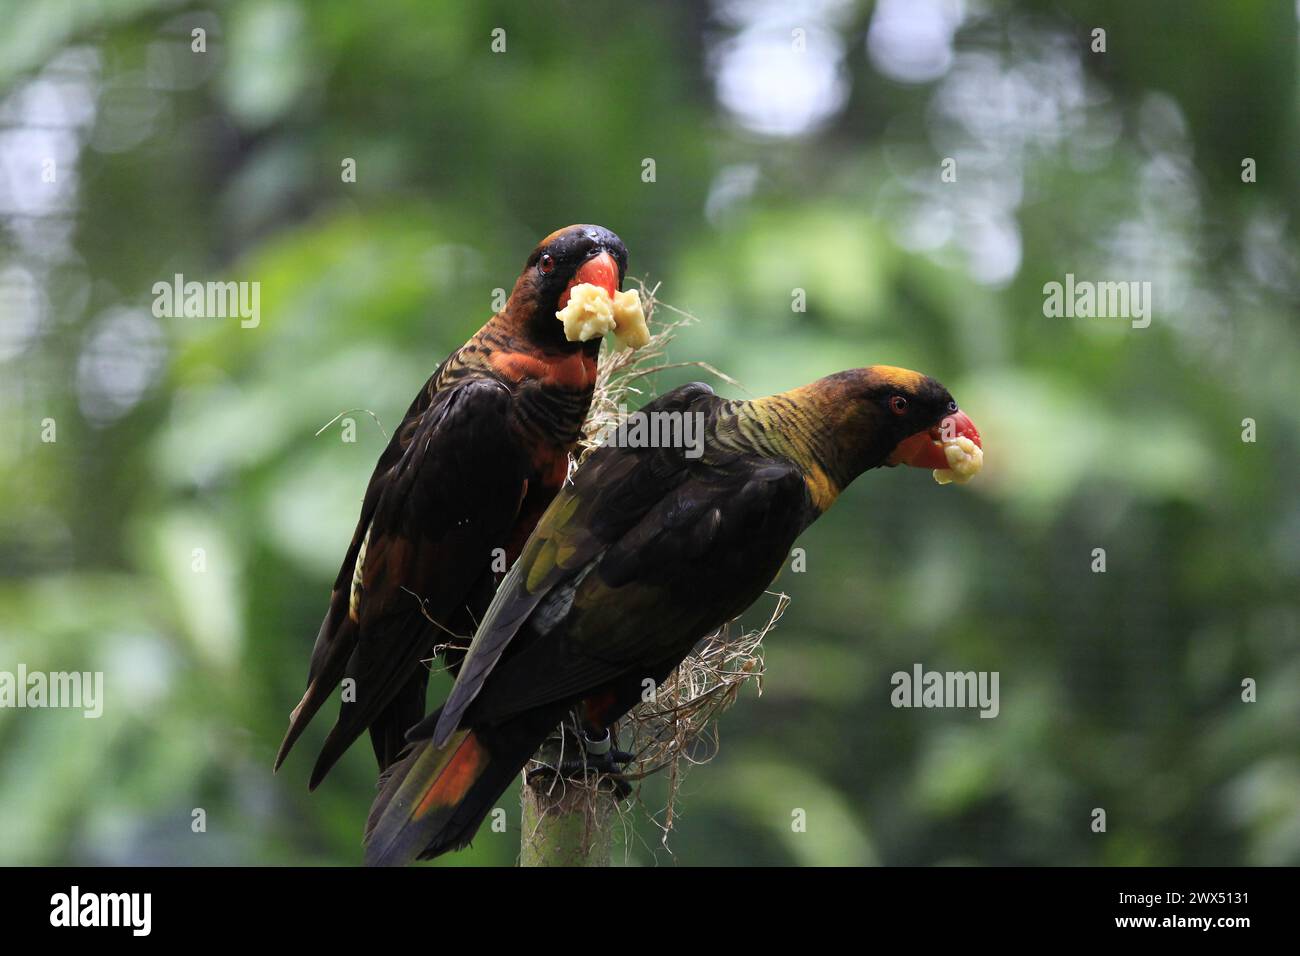 Two birds Dusky Lory (Pseudeos Fuscata) perched on the same branch. Stock Photo